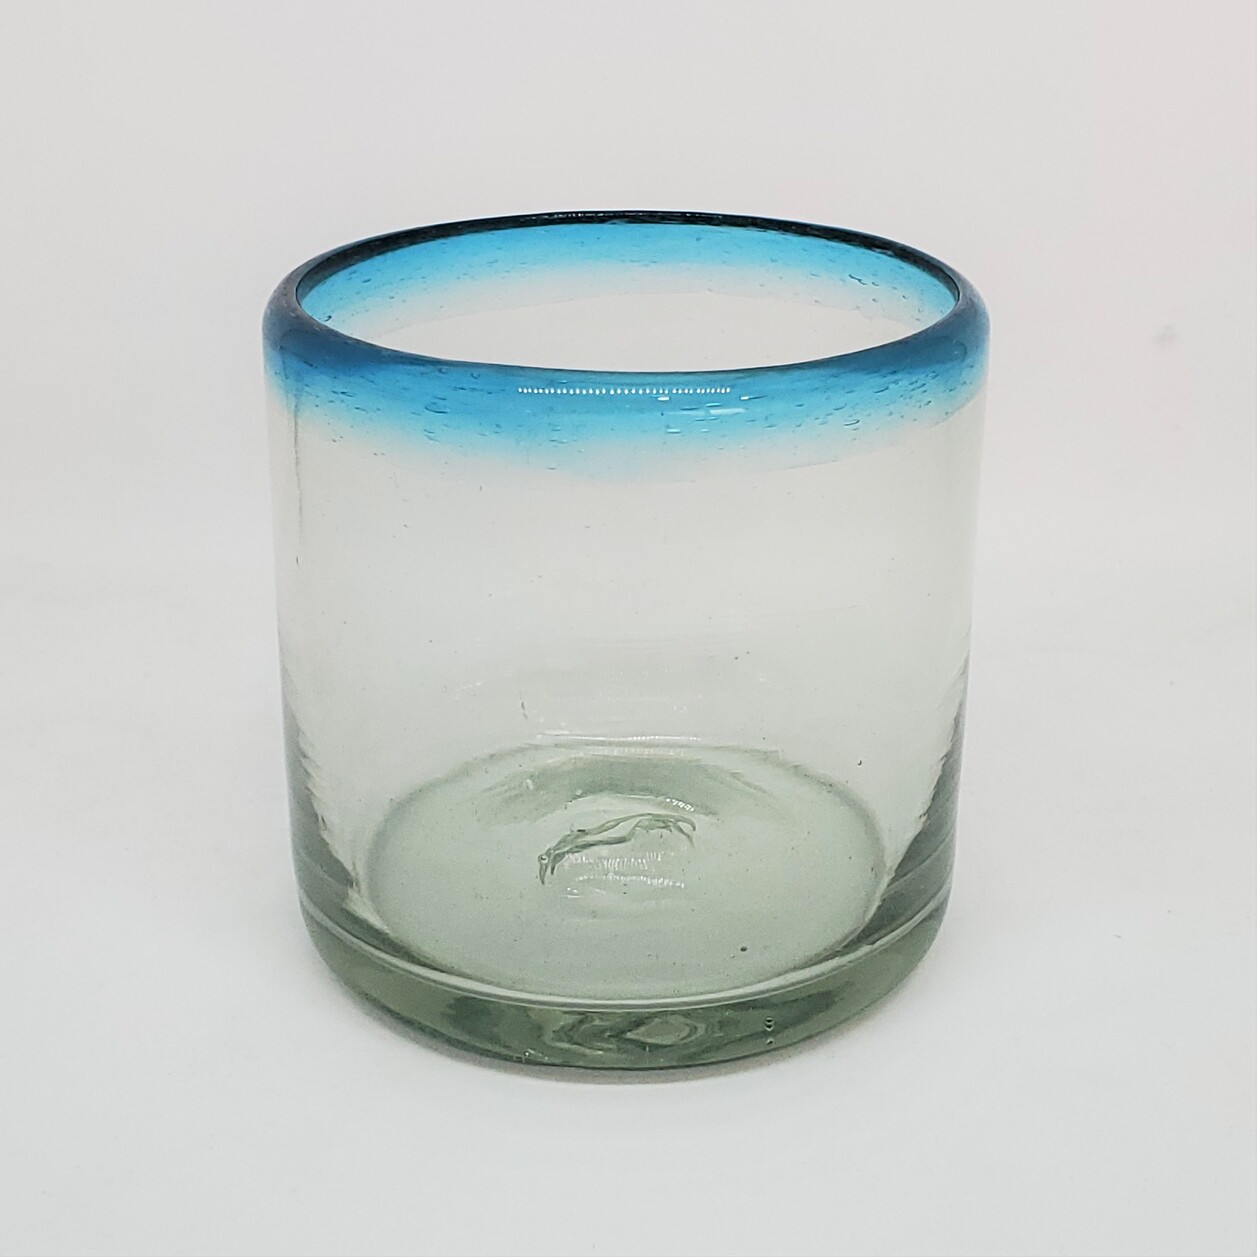 New Items / Aqua Blue Rim 8 oz DOF Rock Glasses (set of 6) / These glasses are just the right size to enjoy fresh squeezed fruit juice in the moning.